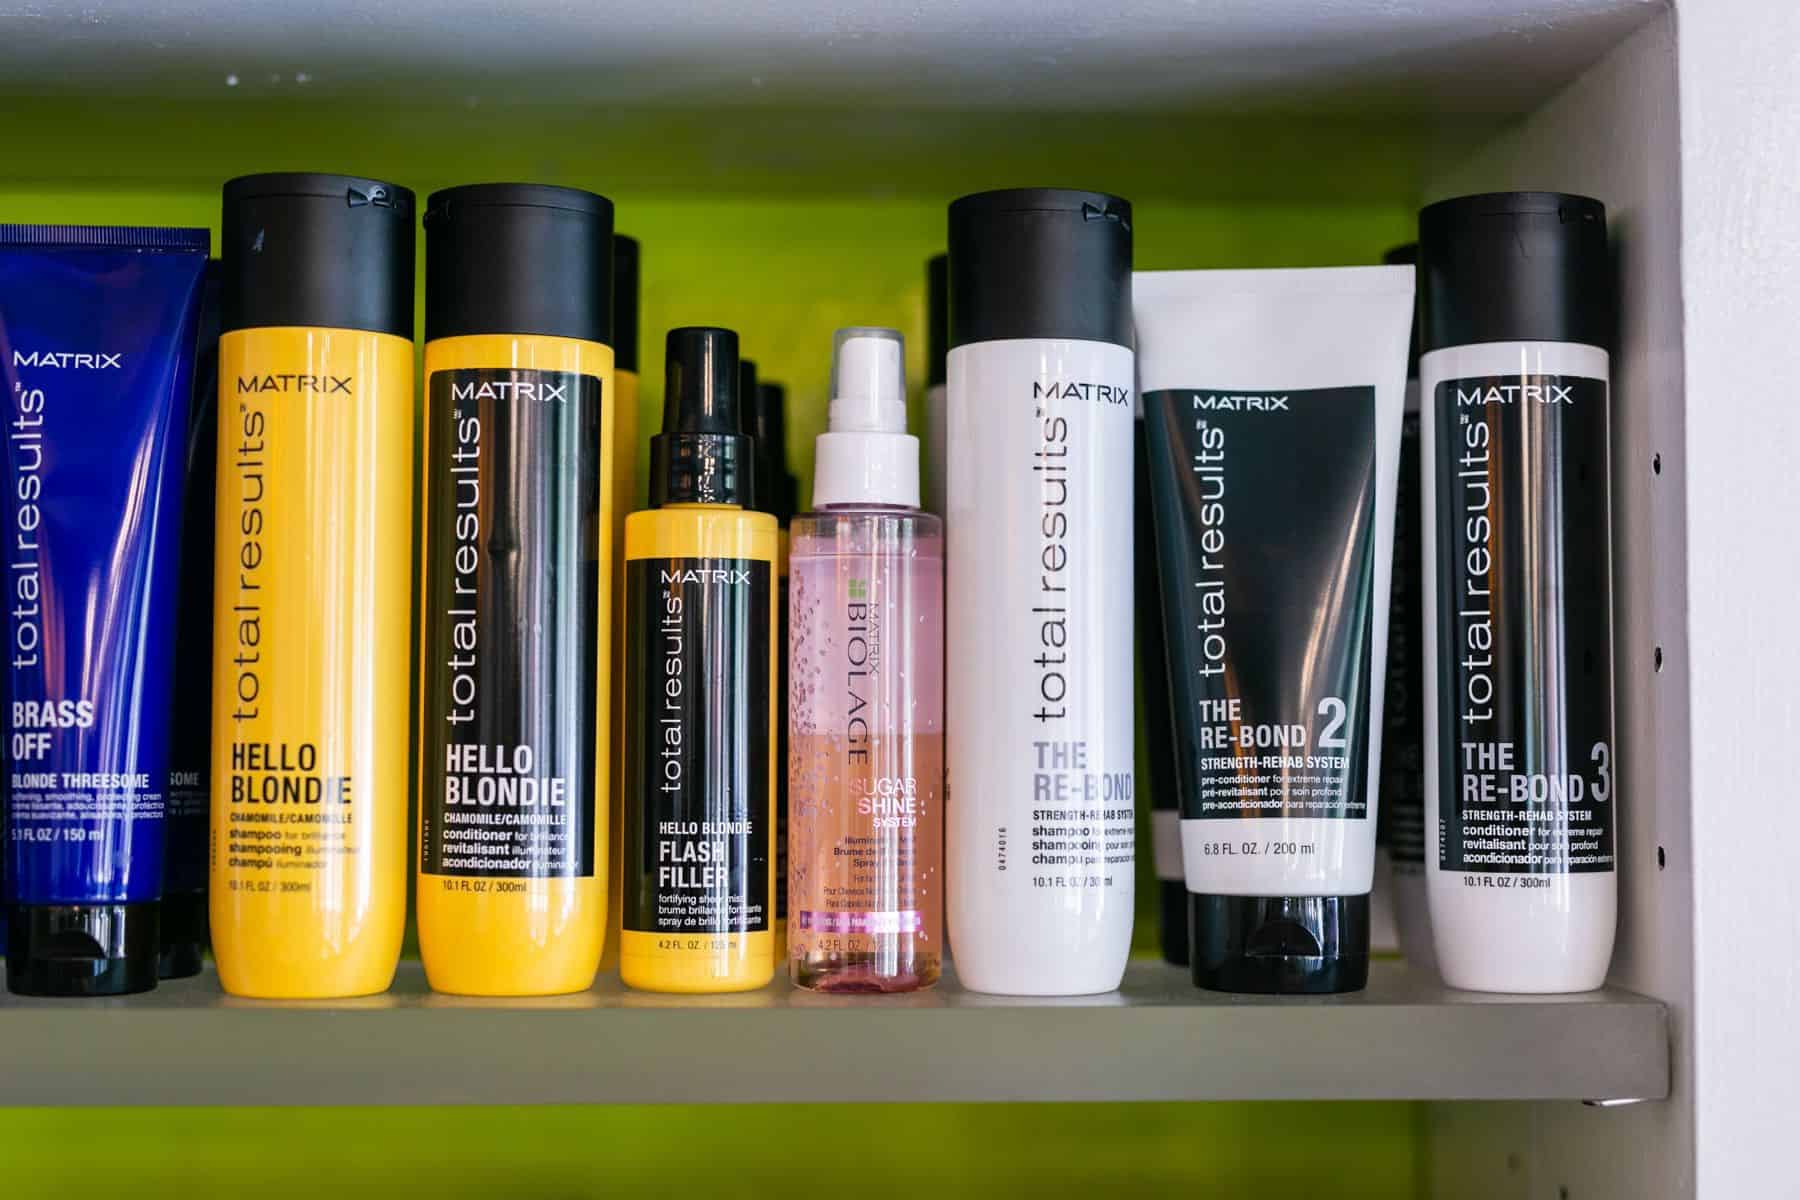 A shelf displaying a variety of hair products, including shampoos, conditioners, styling gels, and hair sprays.